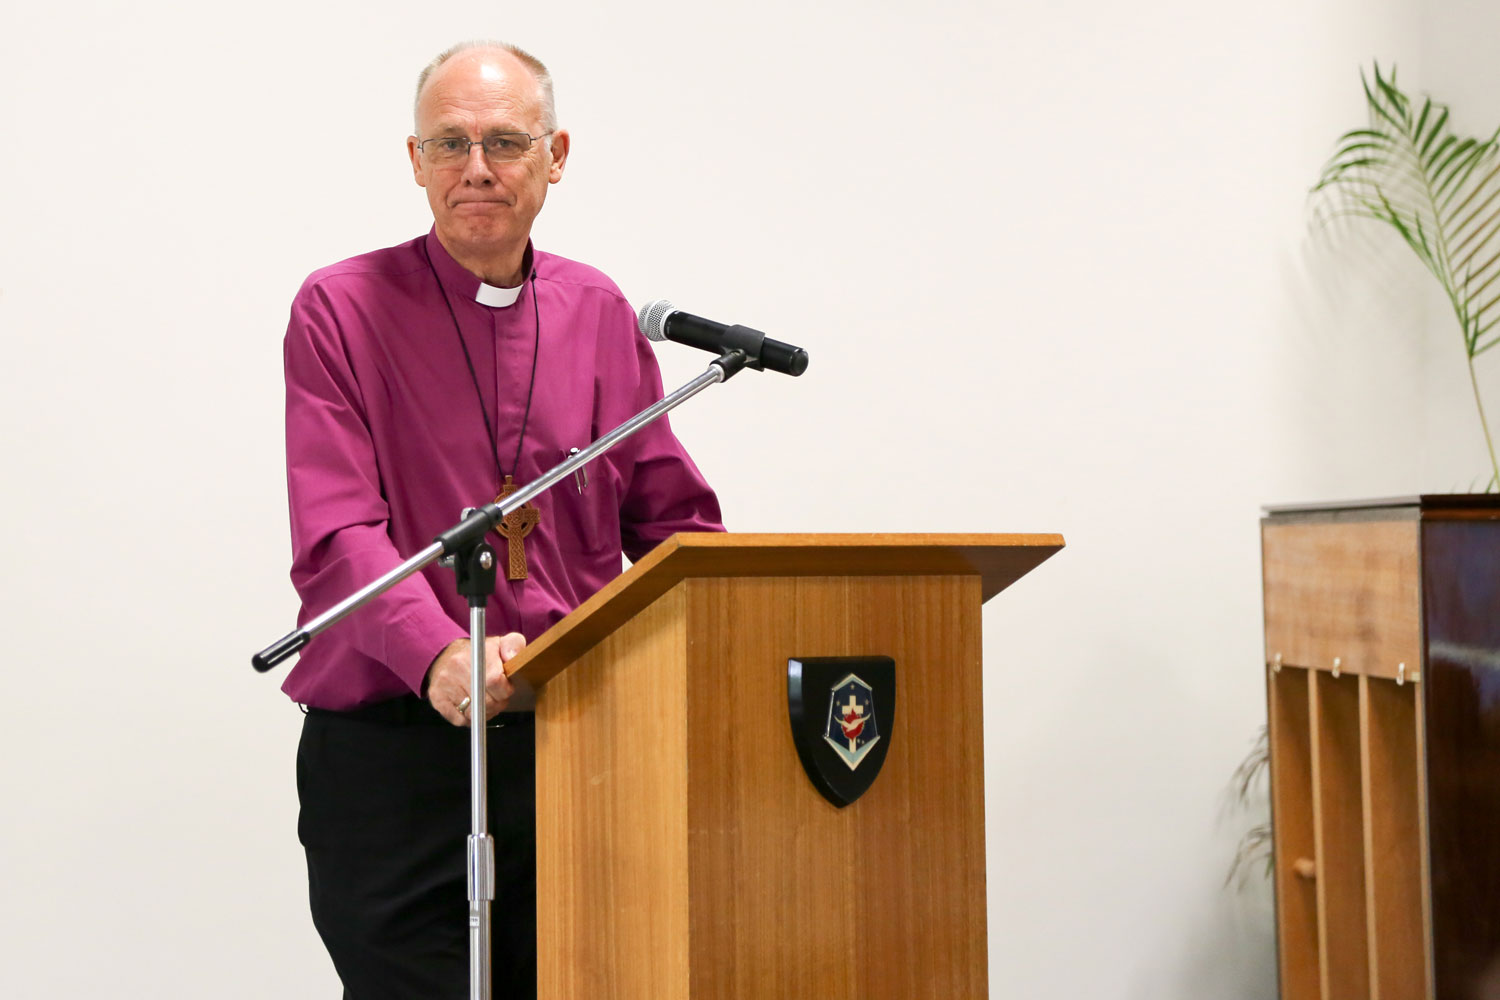 A man in a purple shirt and religious collar stands at a lectern